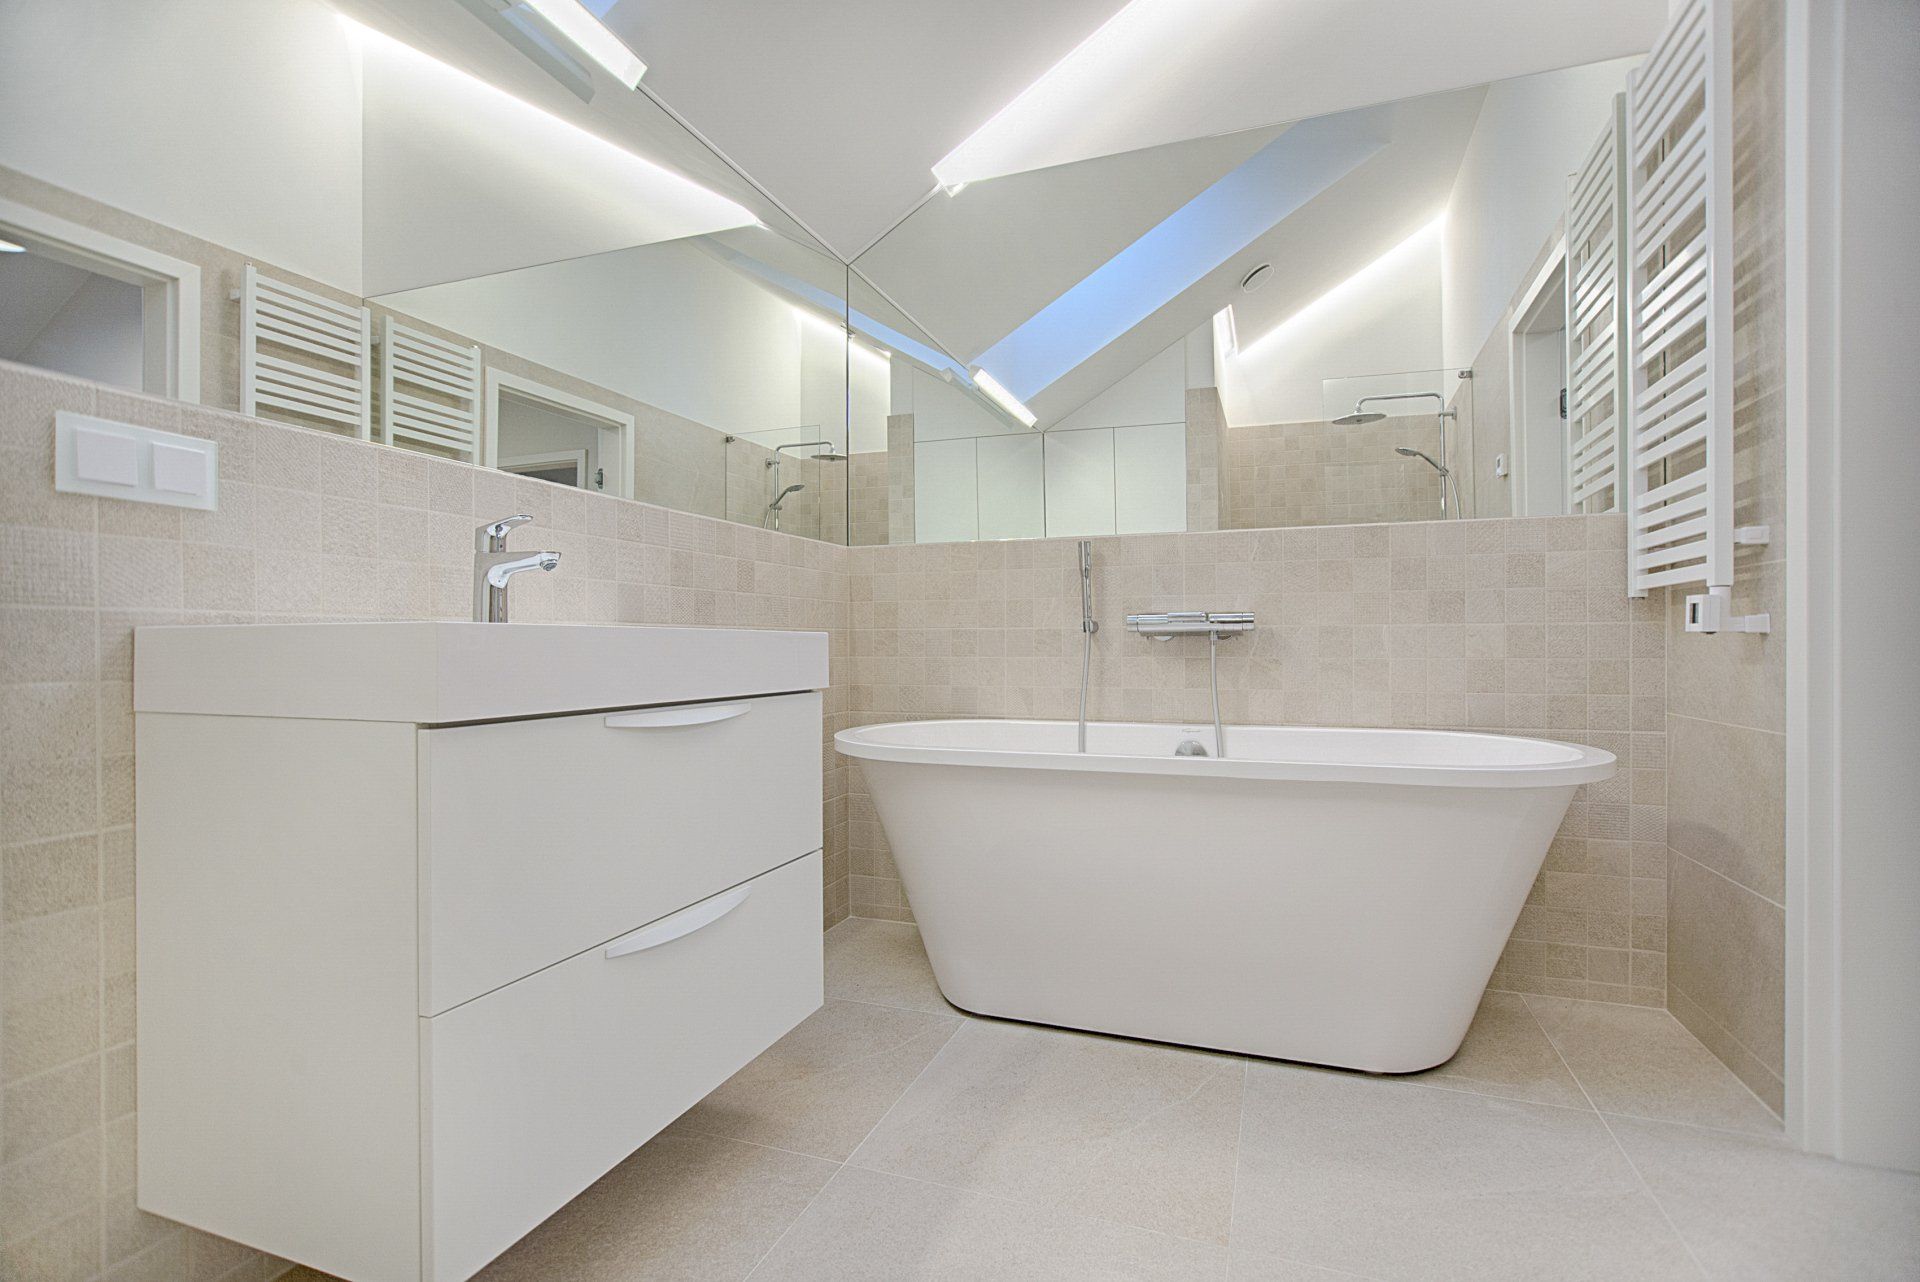 A picture of a white and ivory bathroom suite installed by Plumbers Sheffield